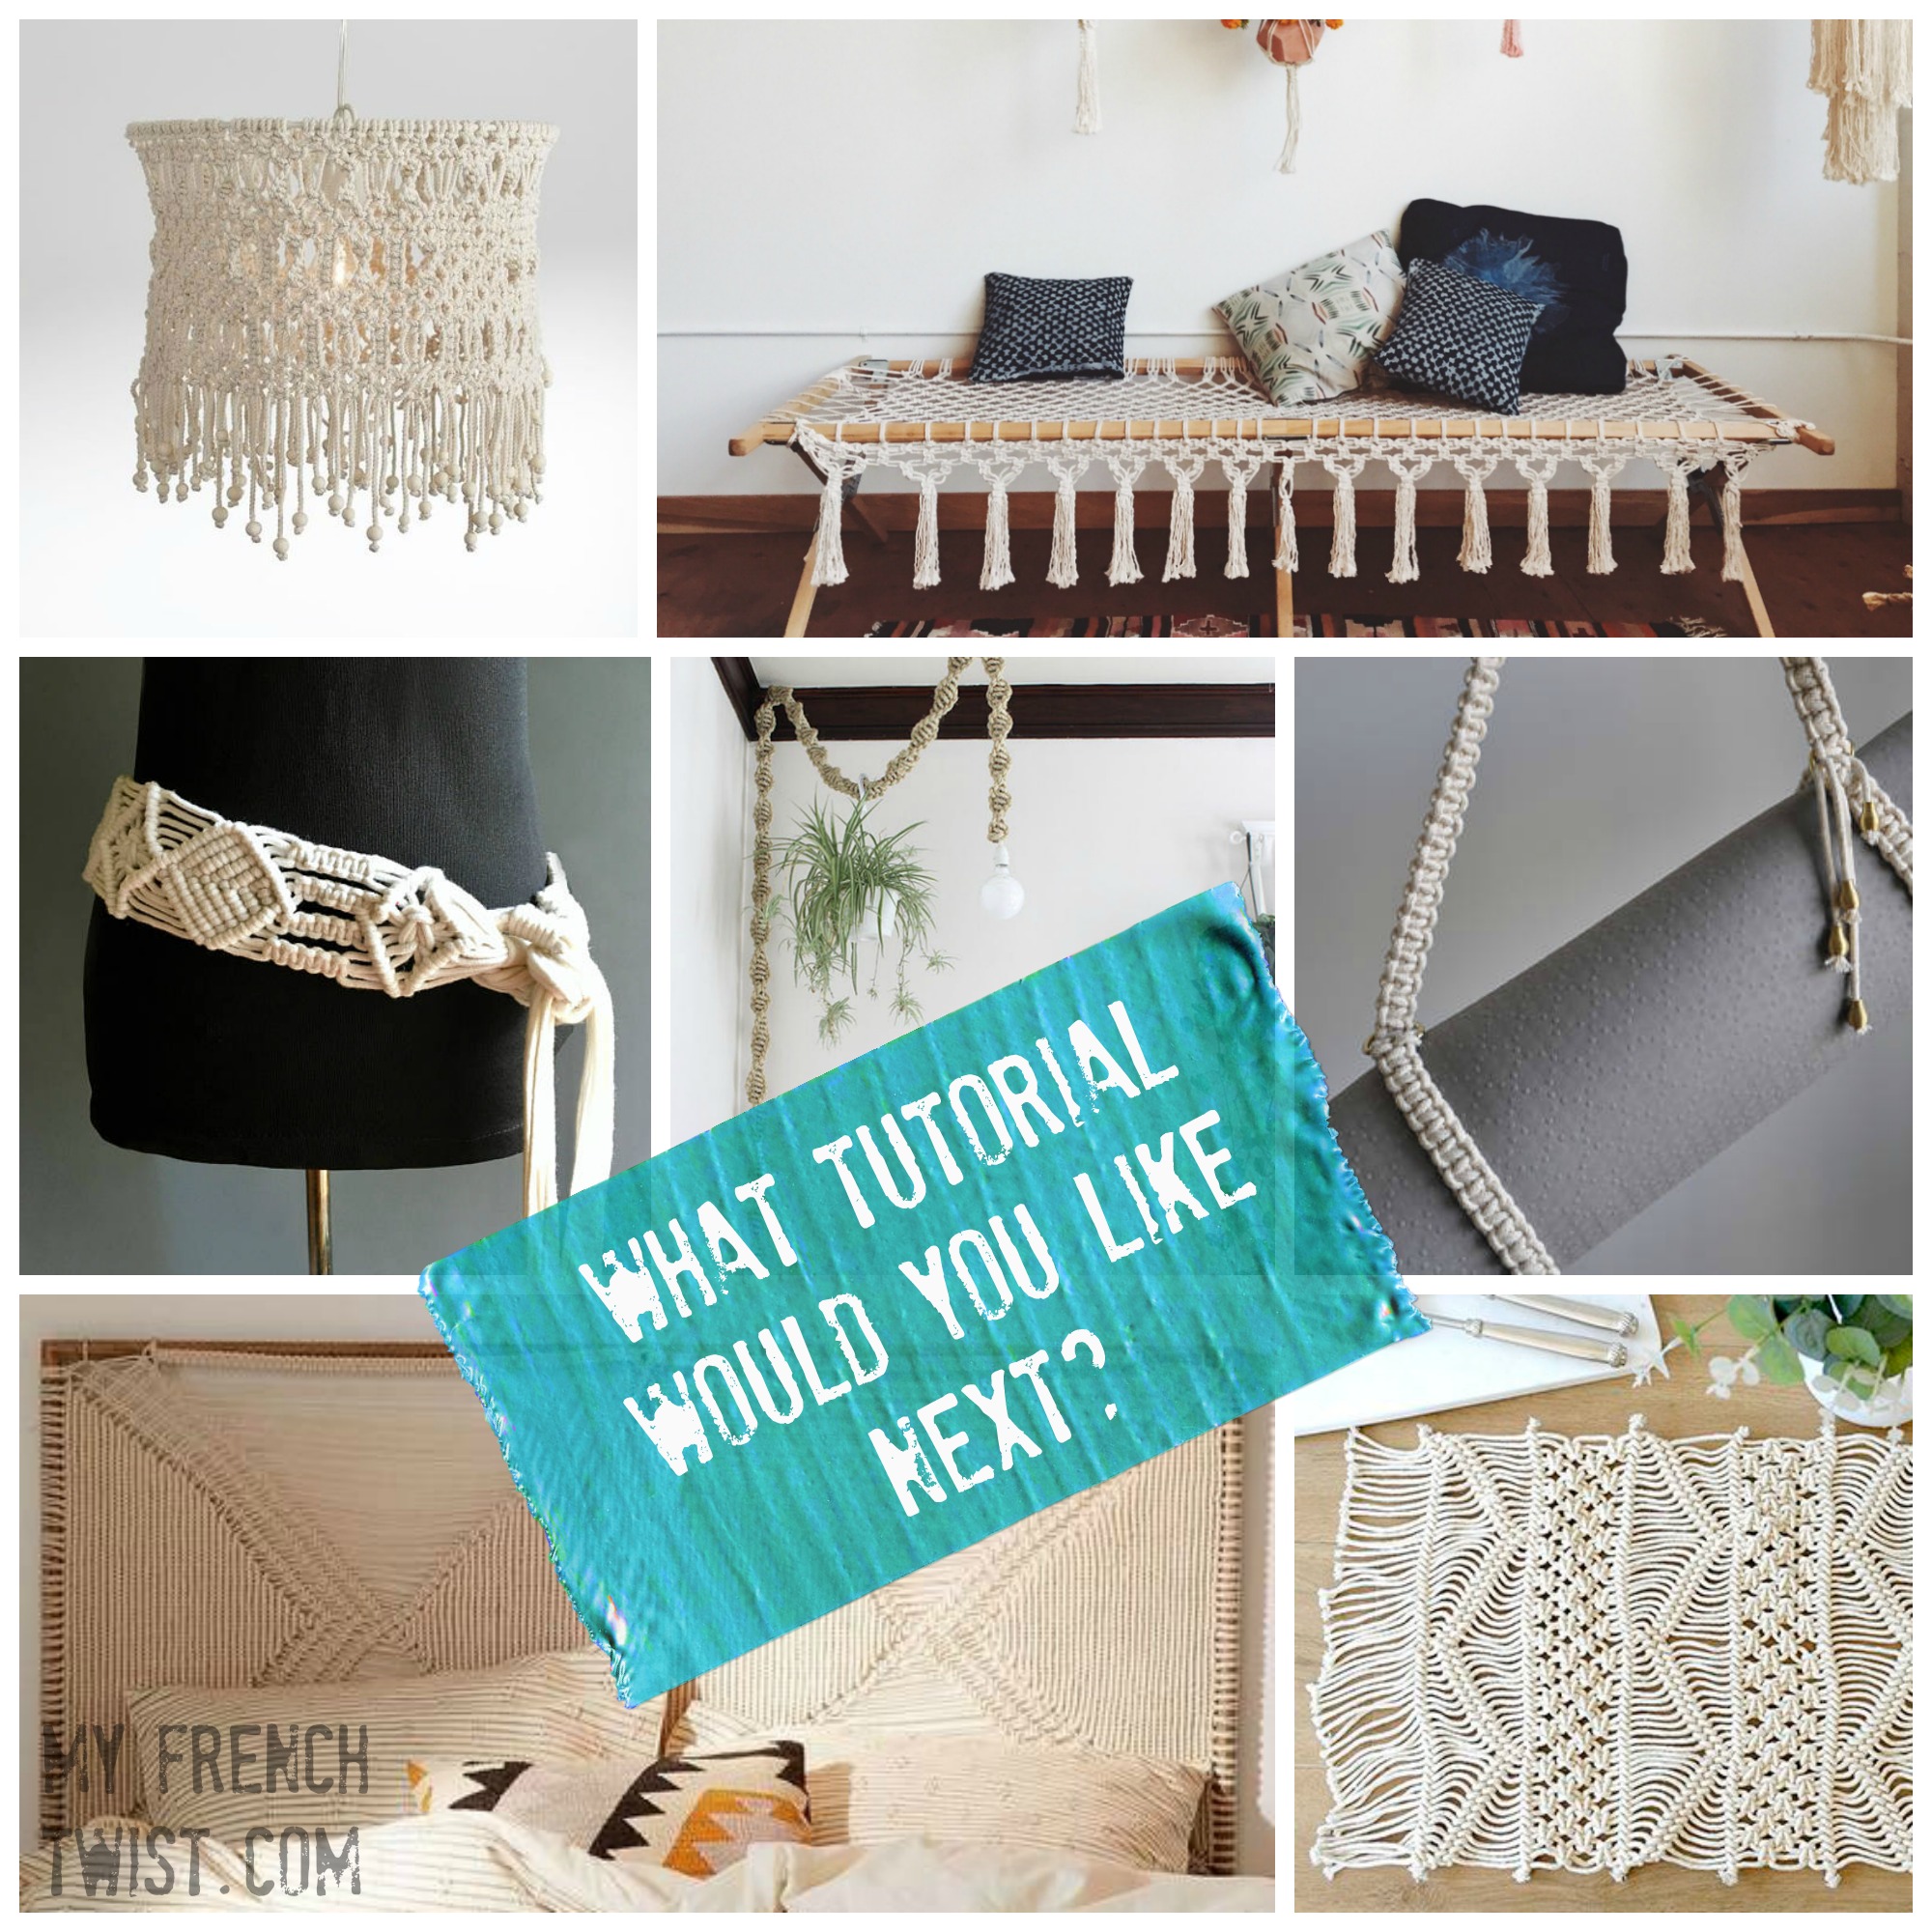 Have fun creating macramé objects with our tutorials!